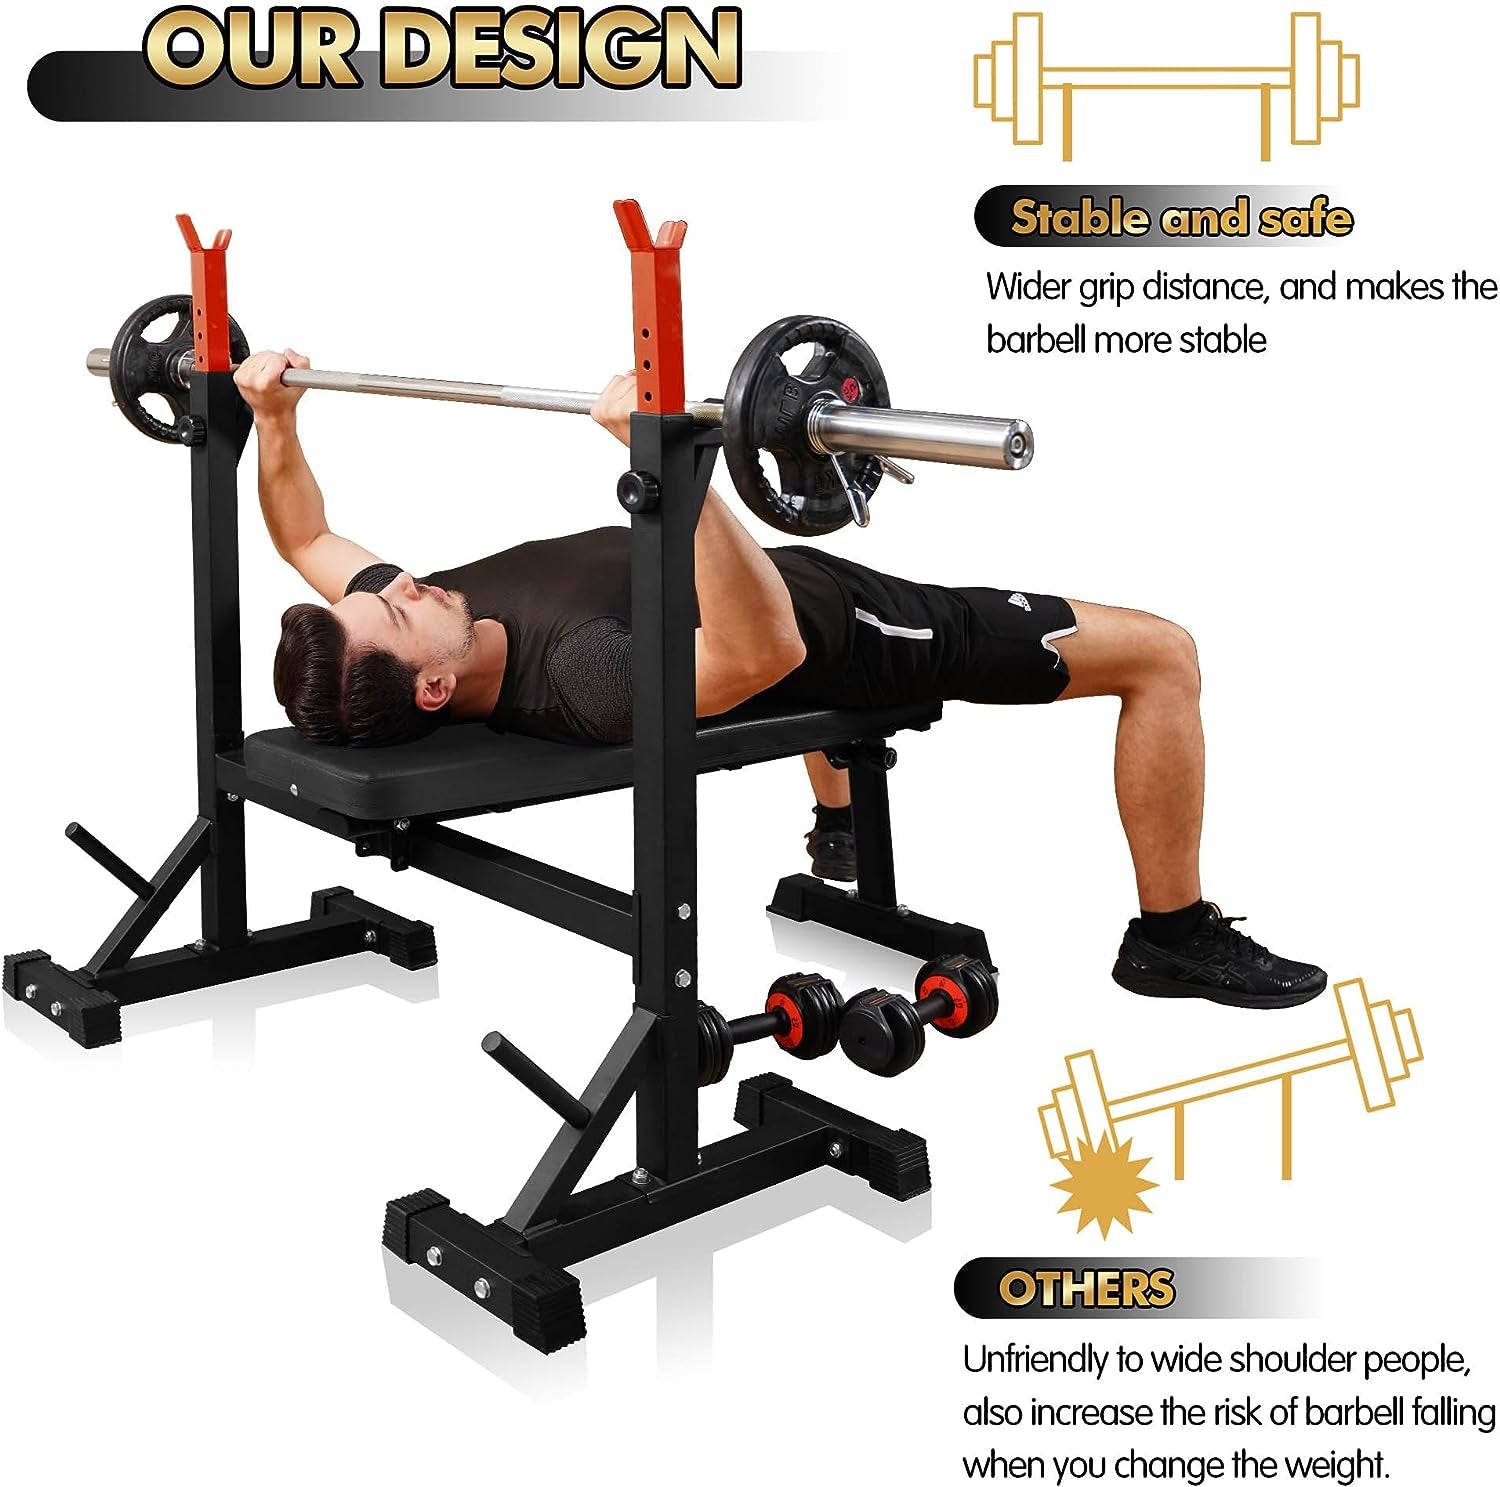 "Ultimate Home Gym Set: Olympic Weight Bench with Squat Rack - Boost Your Strength Training with Adjustable Barbell Rack Stand and Multi-Function Bench Press"